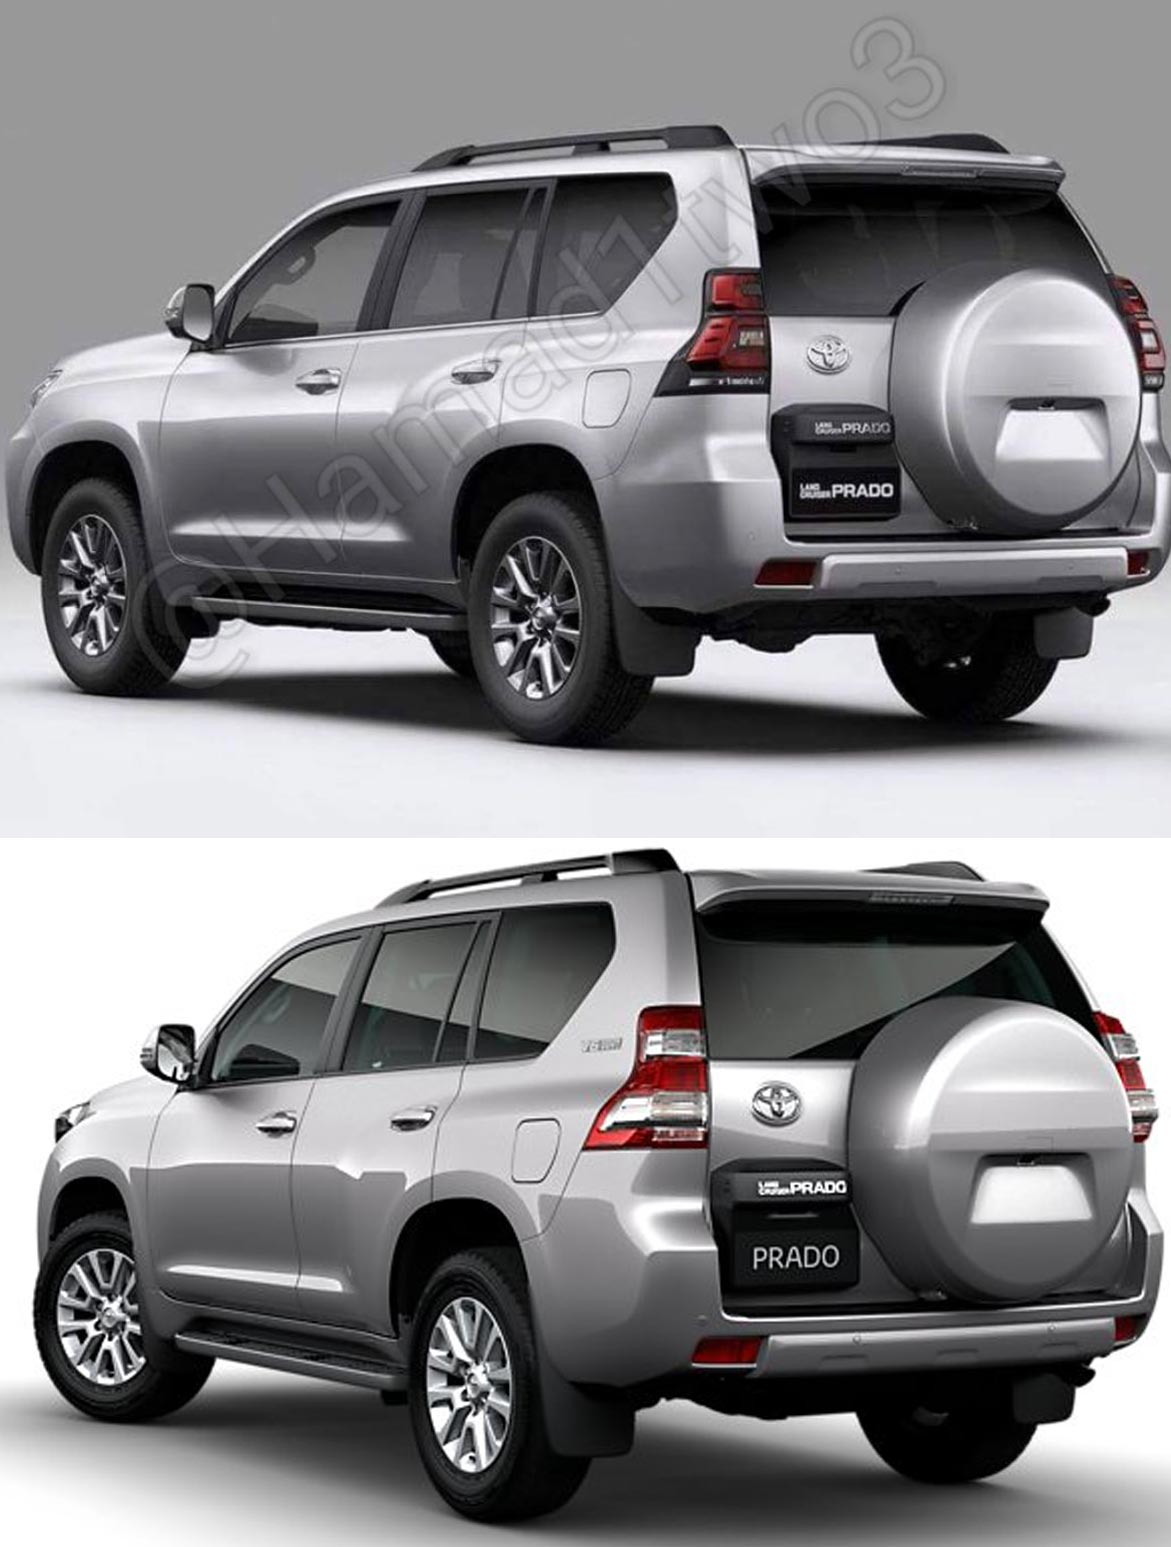 2018 Toyota Land Cruiser Prado Completely Leaked In New High Res